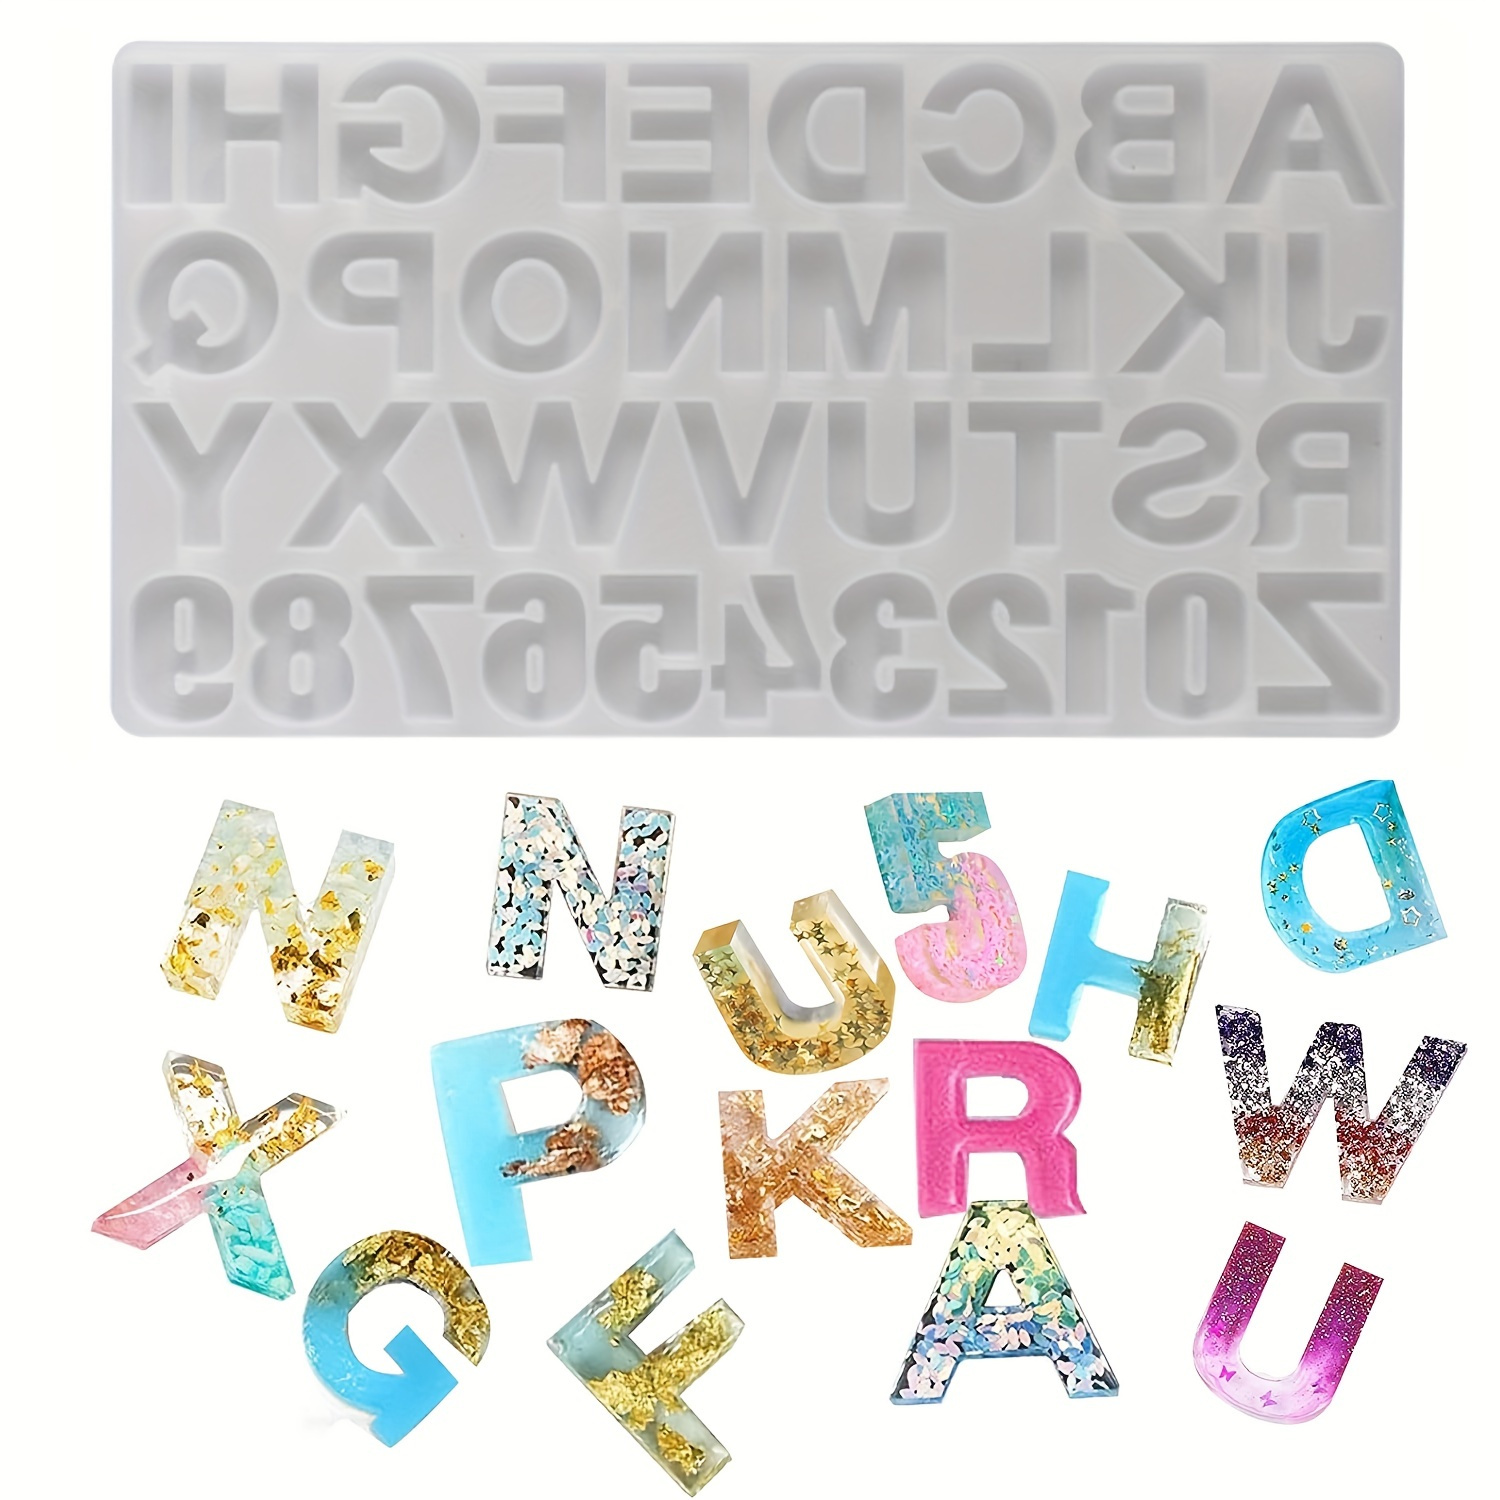 

Reversed Resin Casting Alphabet Pendant Silicone Mold, Sturdy Letter & Number Silicone Mold For Epoxy Resin Crafts, Resin Keychains, Crayons, Soap, Clay Crafts Making (key Rings Not Included)